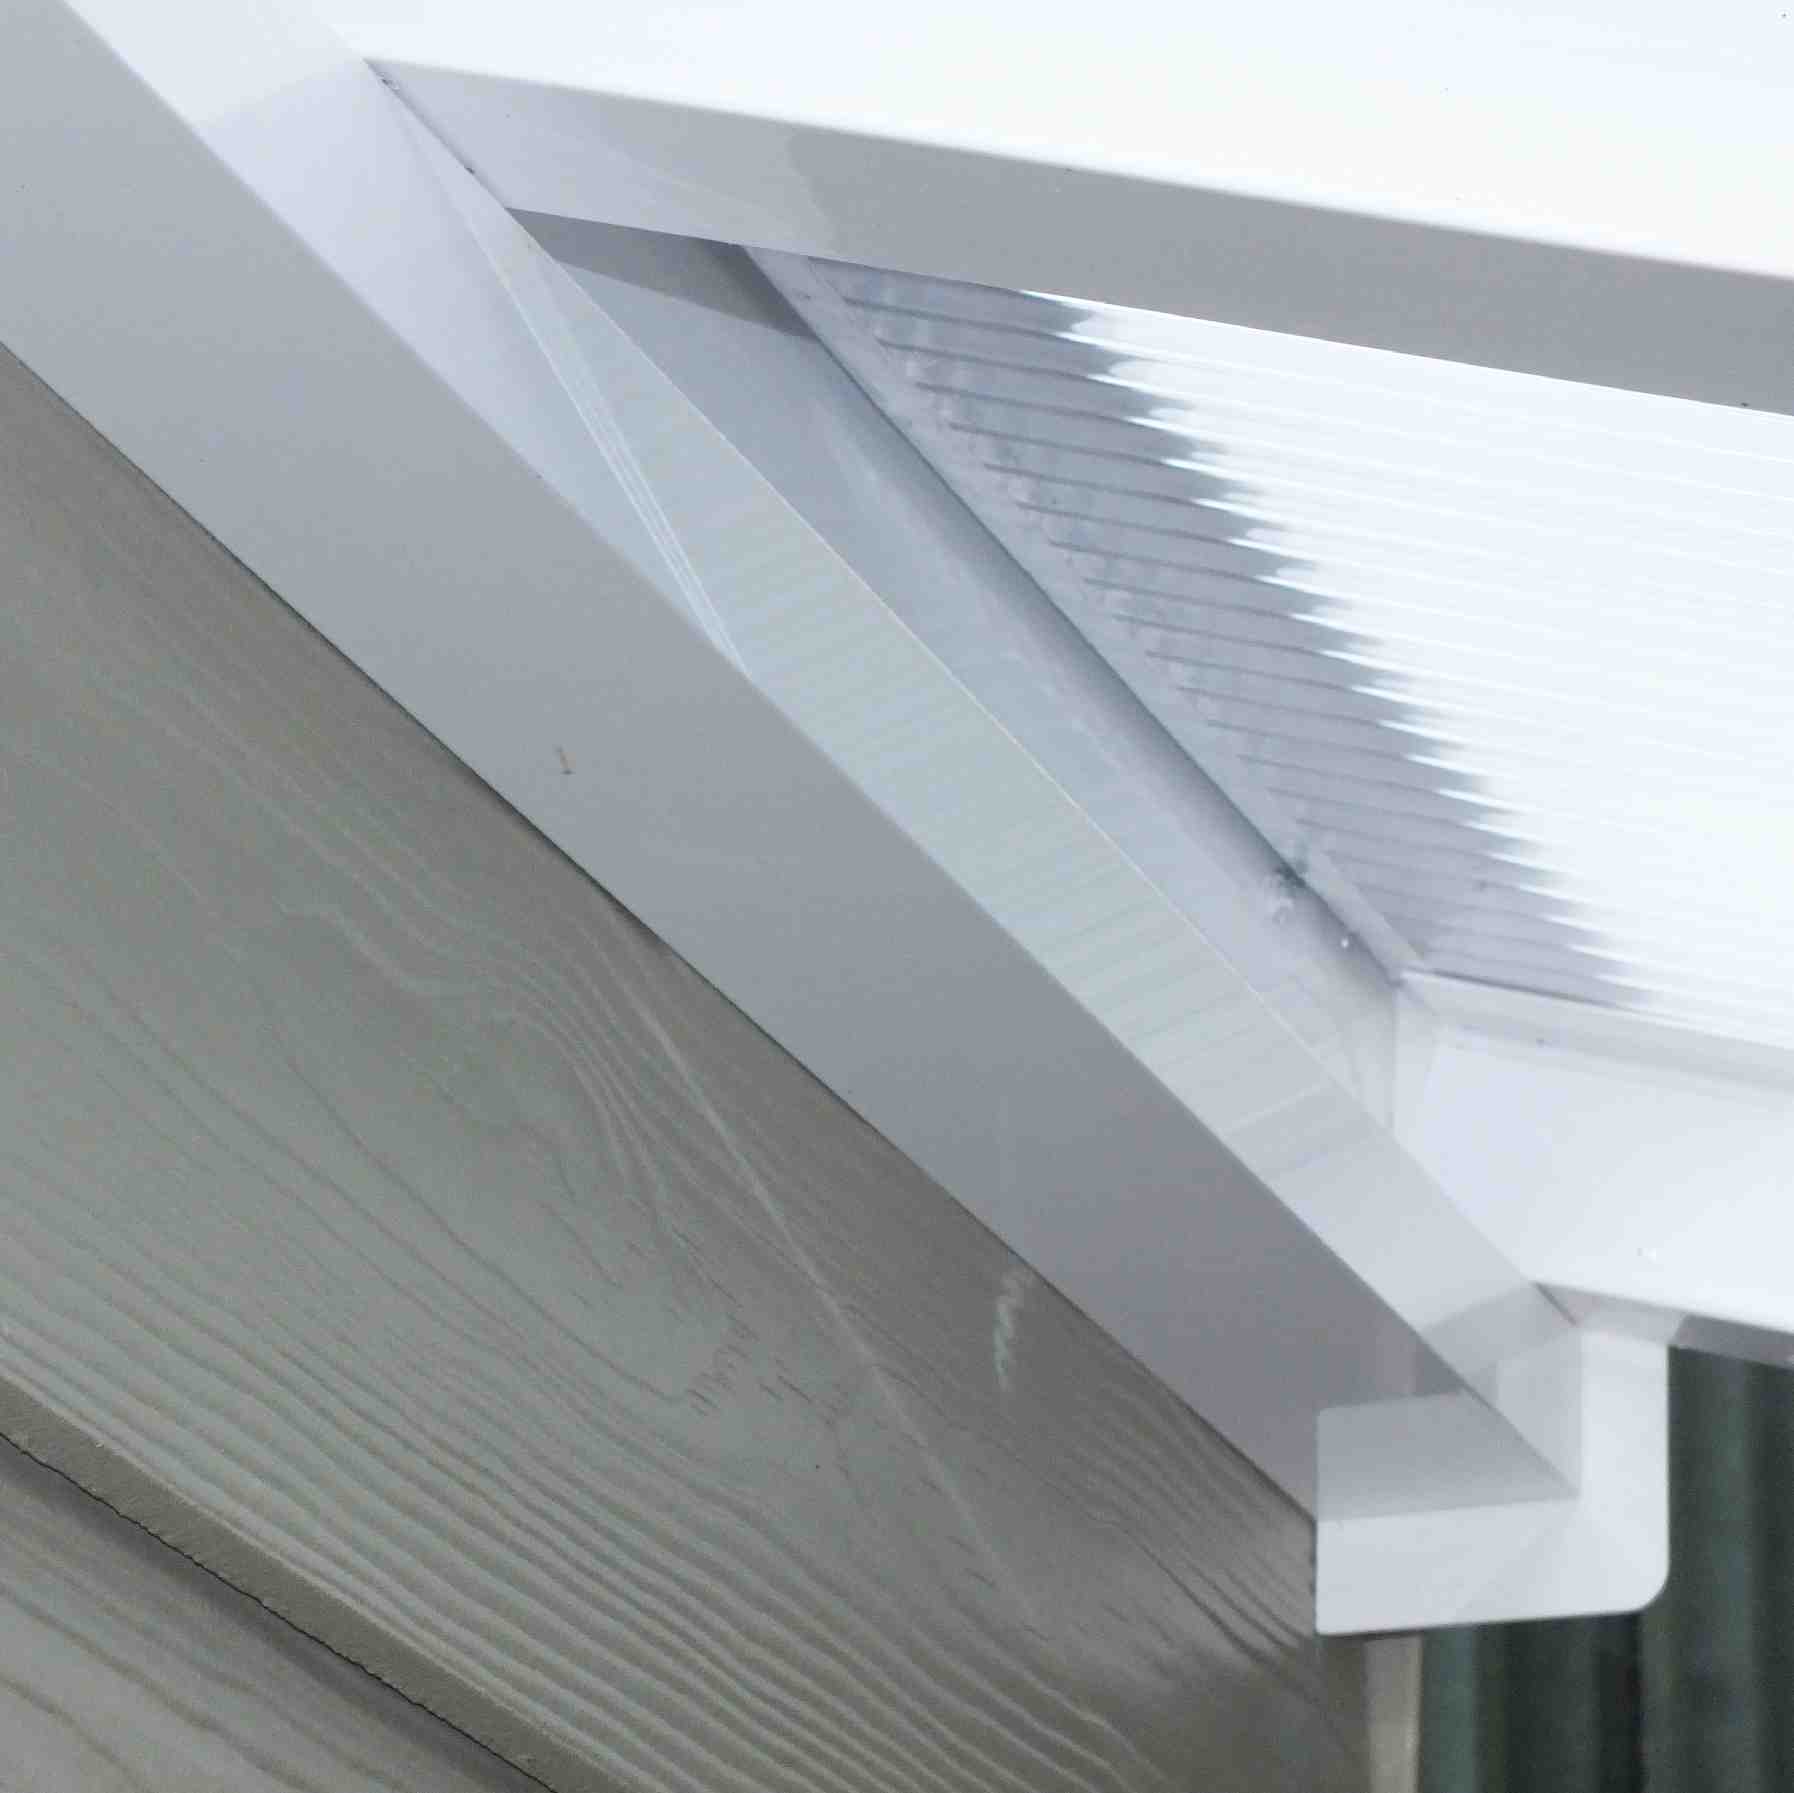 Great deals on Omega Verandah White with 16mm Polycarbonate Glazing - 3.1m (W) x 2.0m (P), (2) Supporting Posts